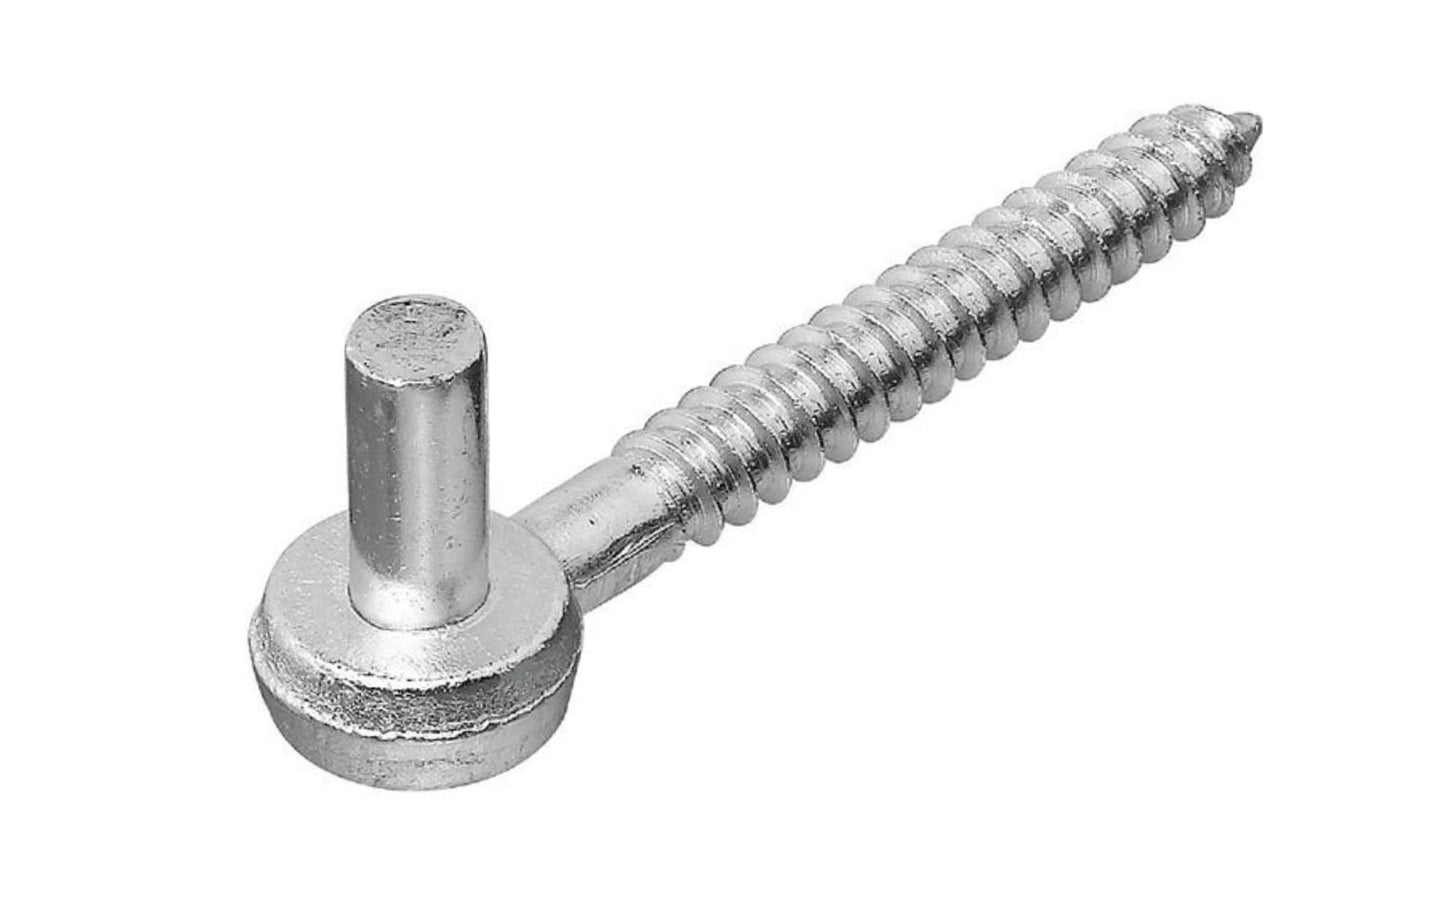 This 5/8" x 5" Steel Screw Hook adjusts gates to correct gate sag. Zinc-plated to resist corrosion. Rolled threads. Coated with "WeatherGuard" protection to withstand harsh weather conditions & prevent corrosion. National Hardware Catalog Model No. N130-146.